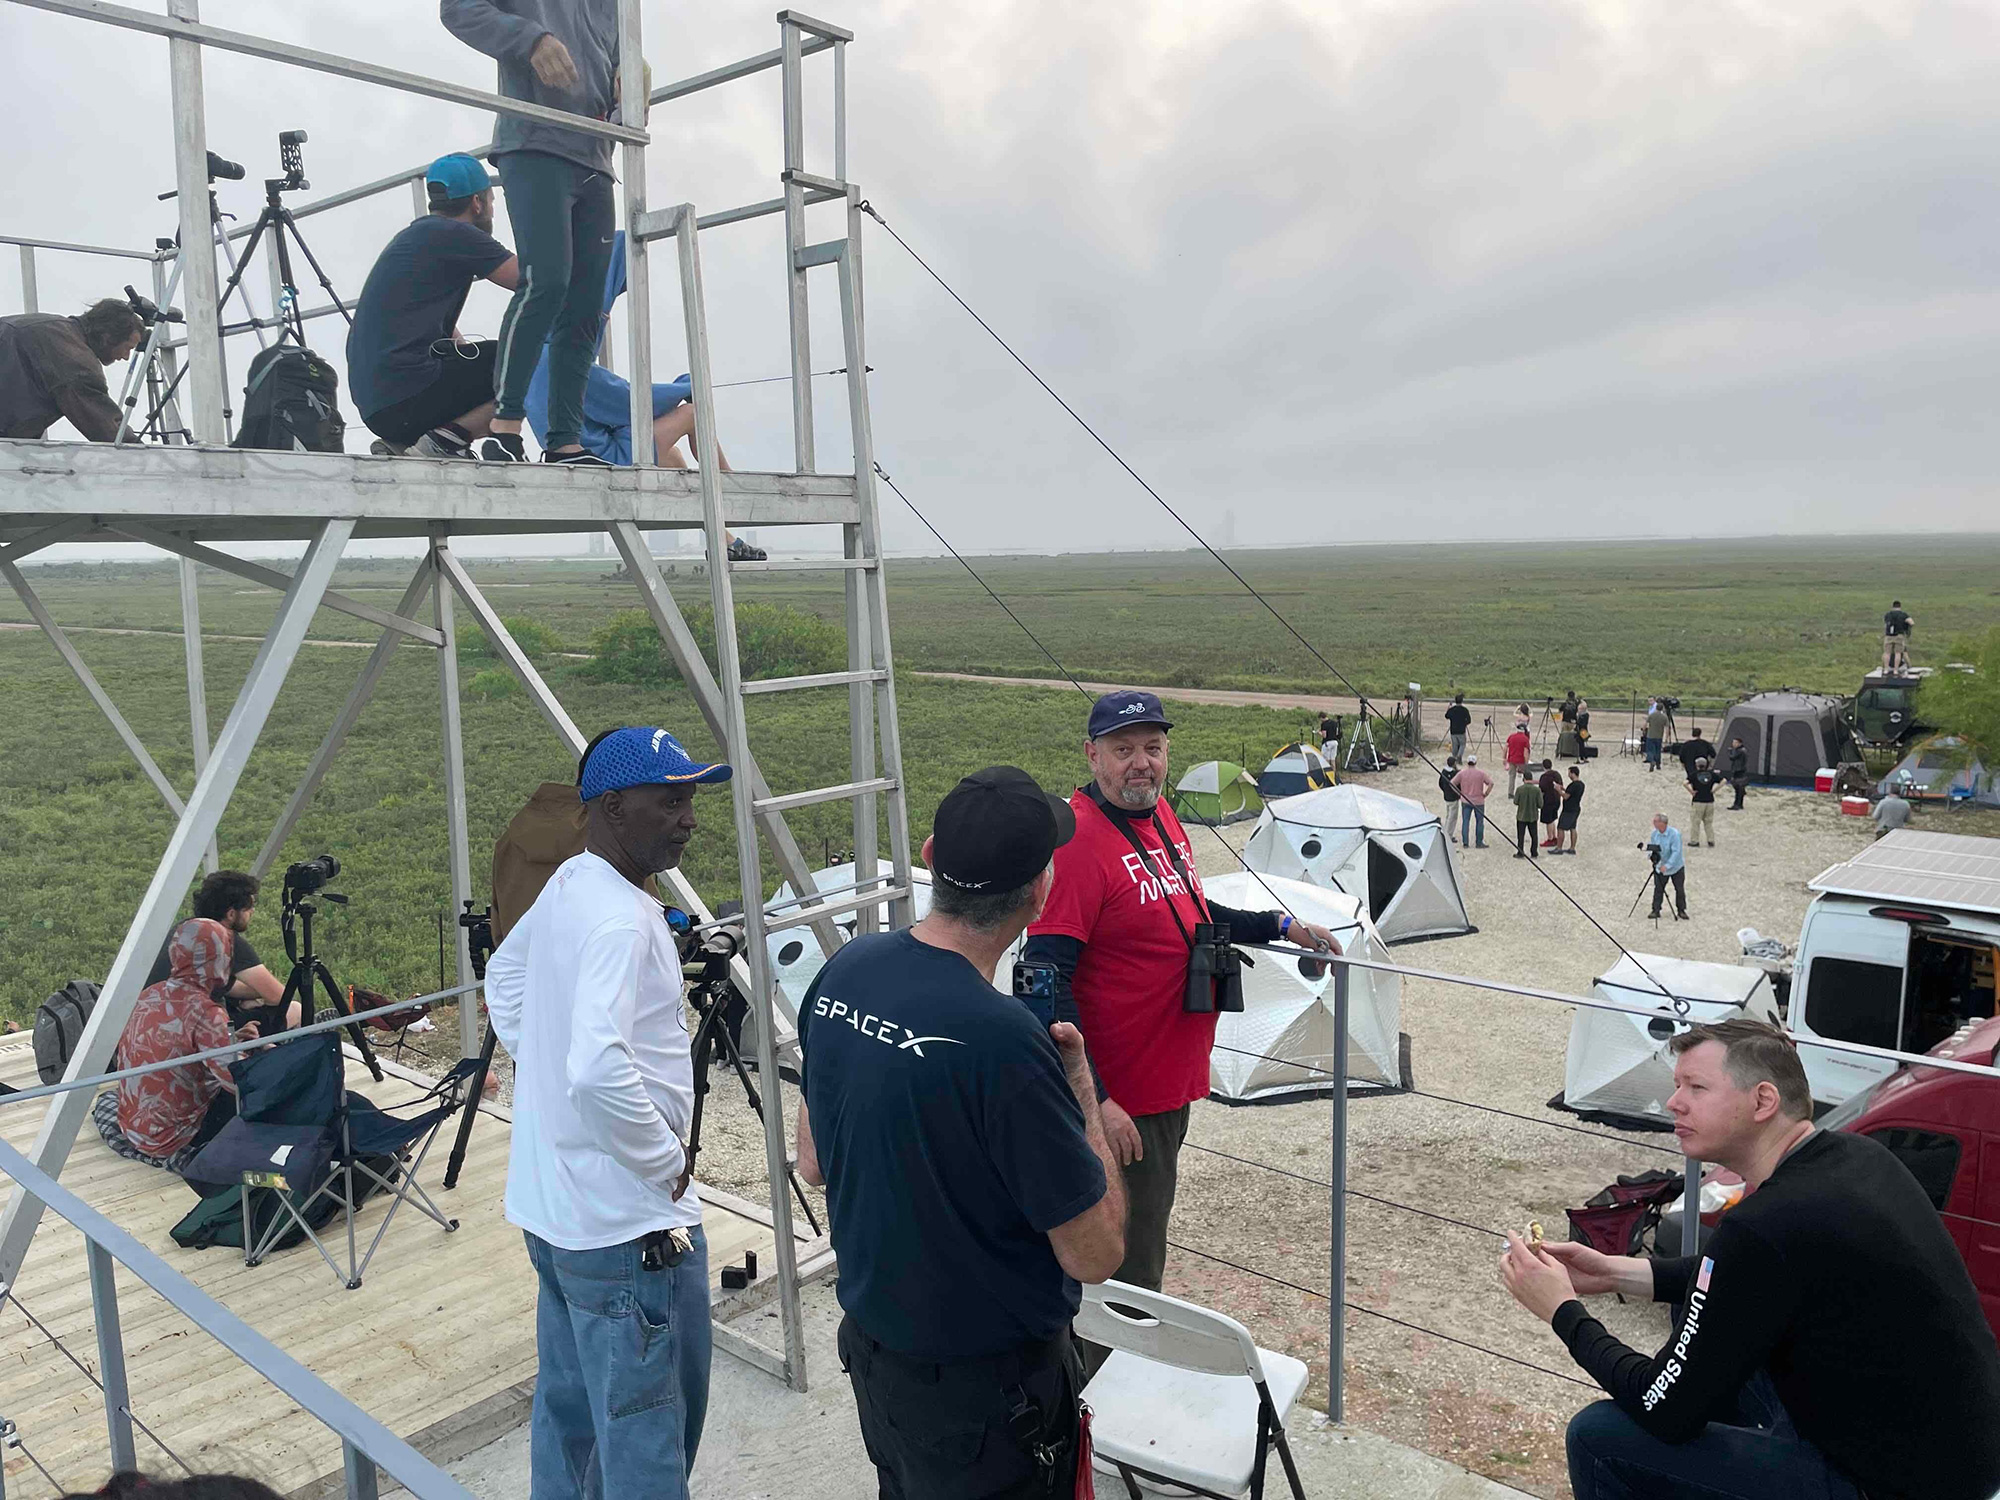 Spectators are seen at "The Outpost," a Starship viewing location set up by the local Rocket Ranch, near Boca Chica beach in Texas.